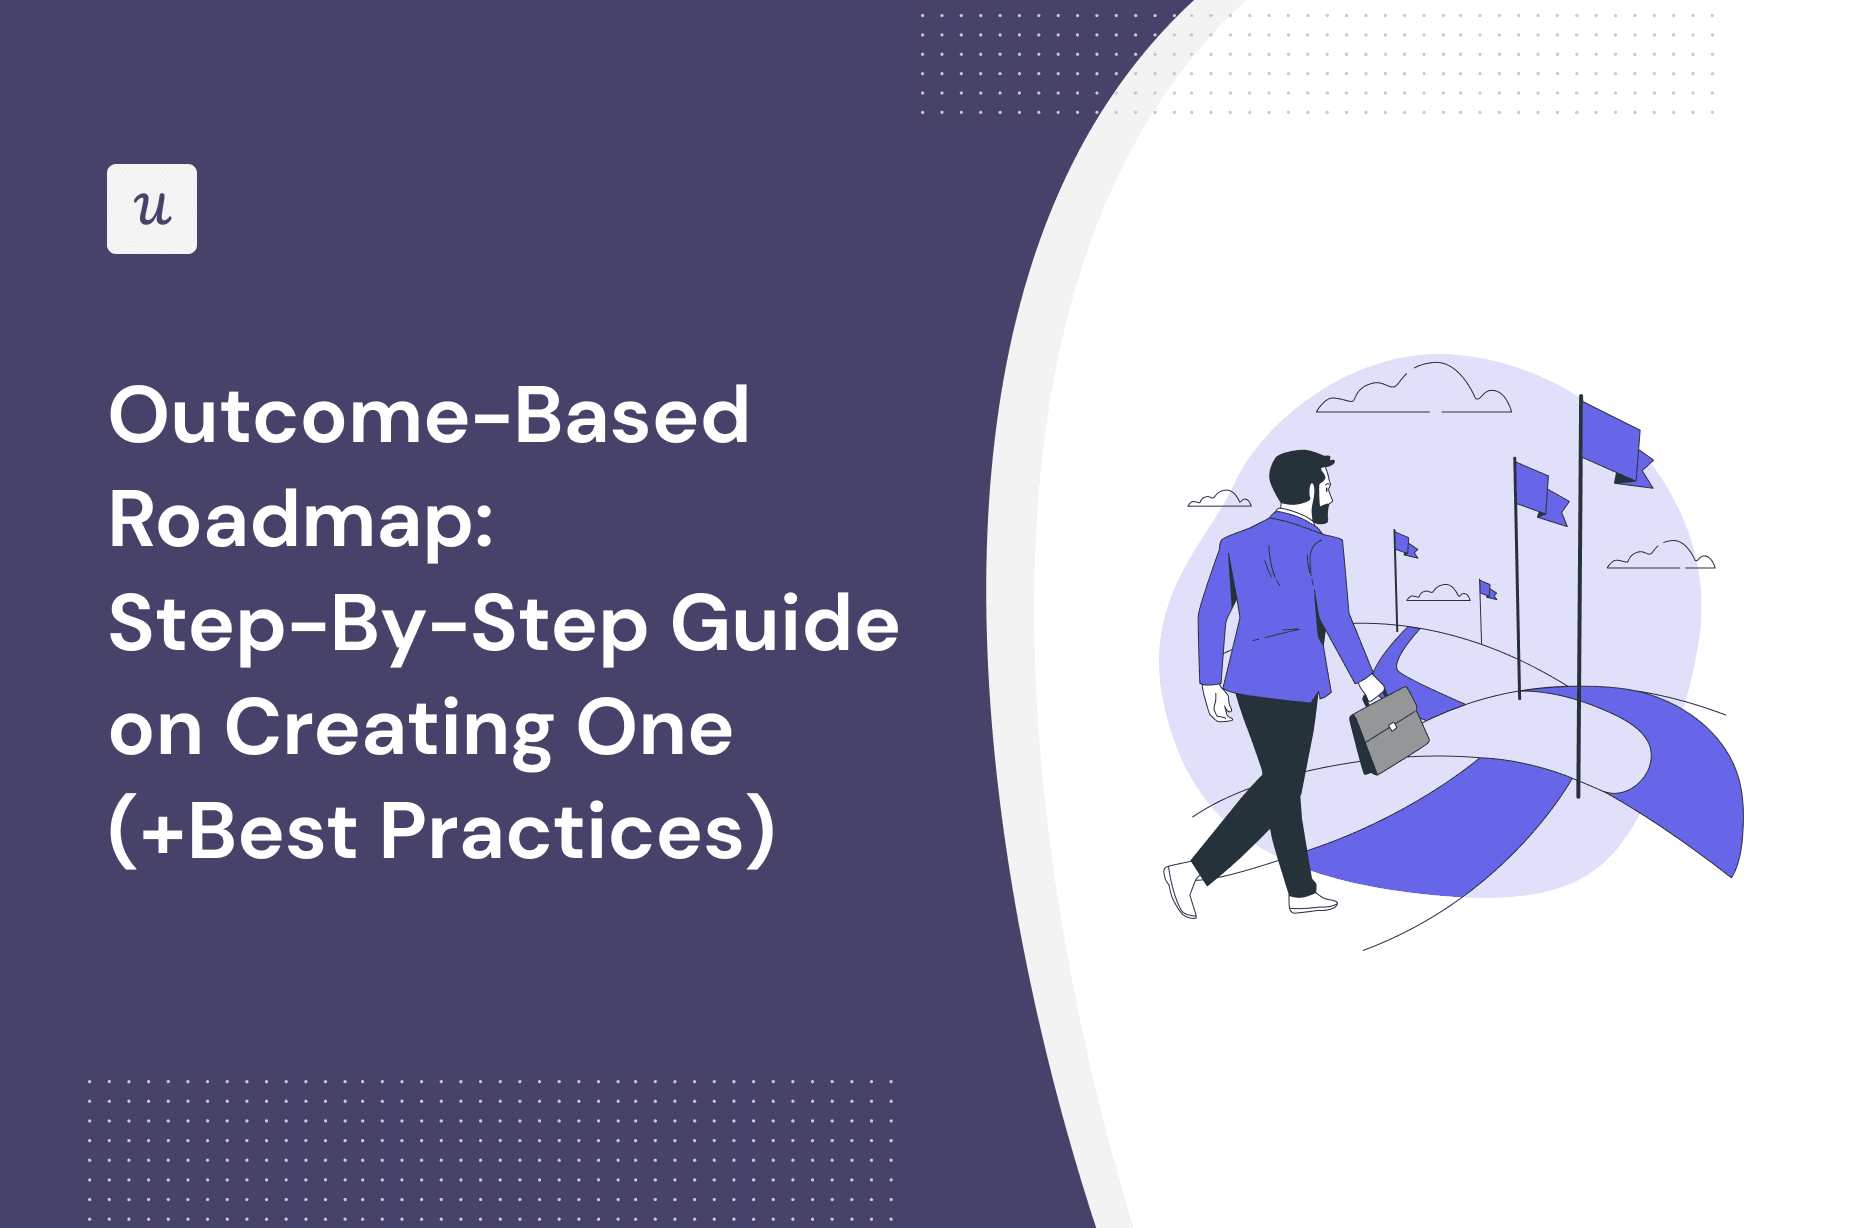 Outcome-Based Roadmap: Step-By-Step Guide on Creating One (+Best Practices) cover